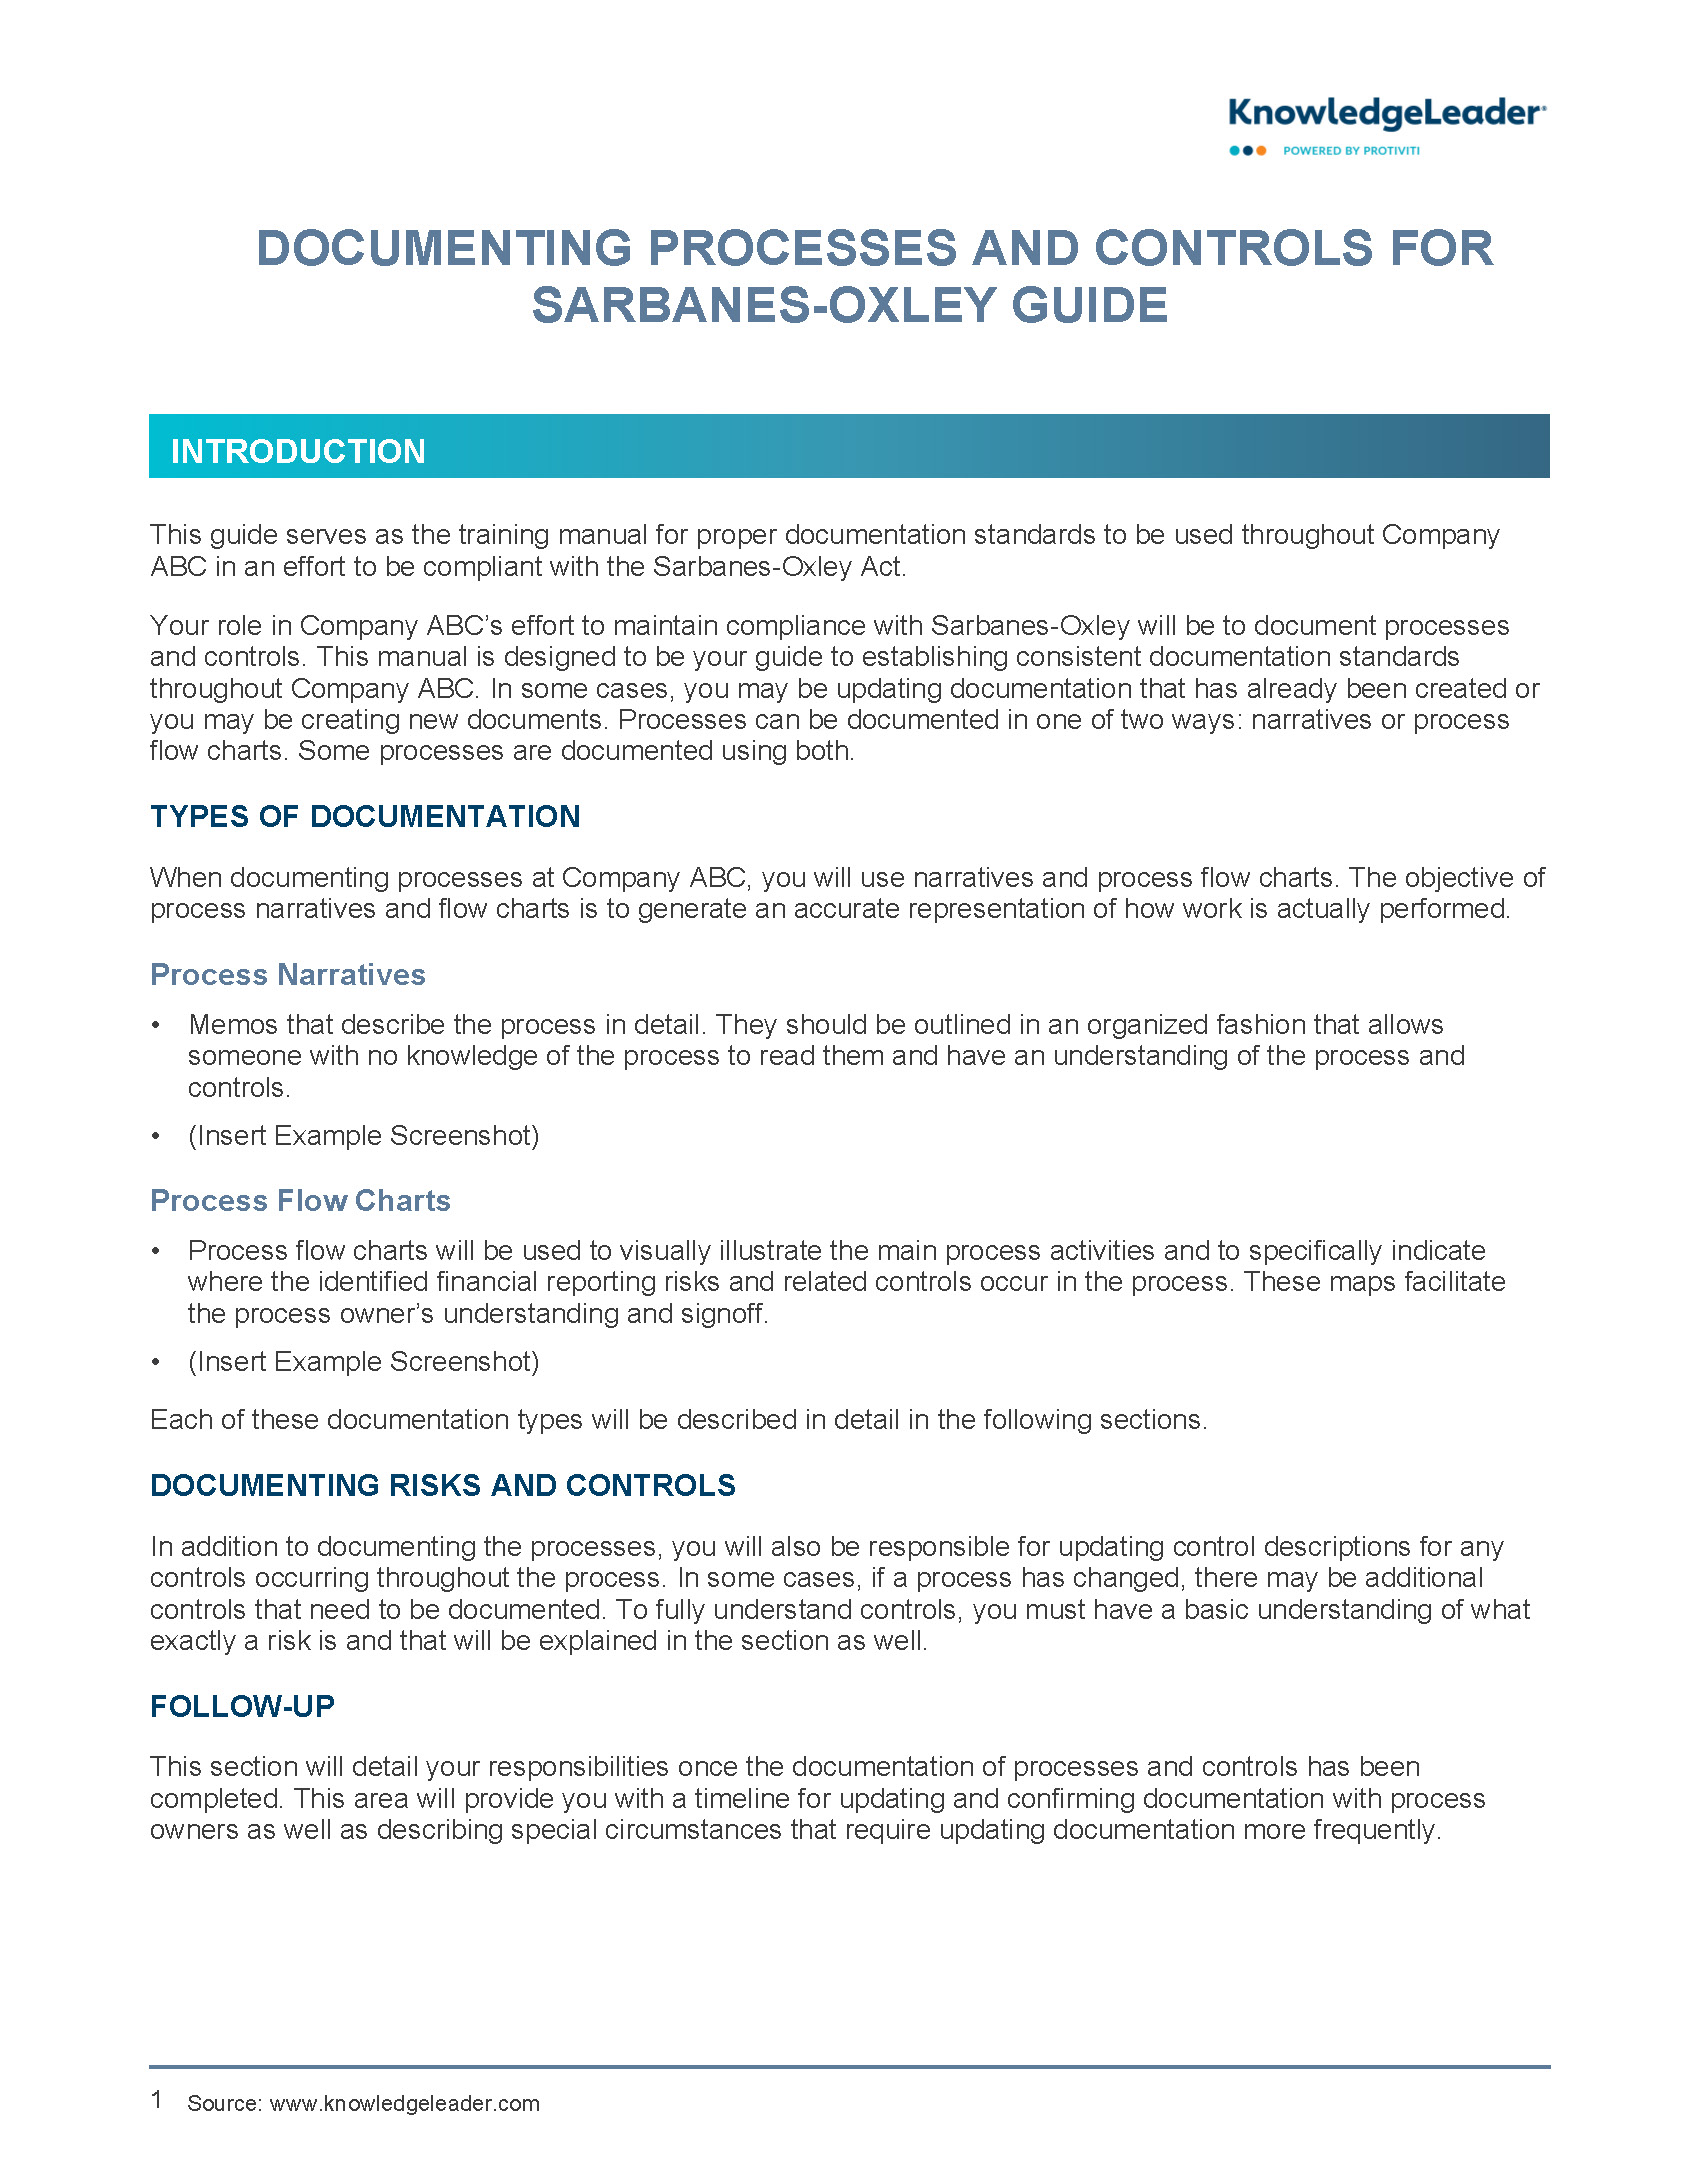 Screenshot of the first page of Documenting Processes and Controls for Sarbanes-Oxley Guide